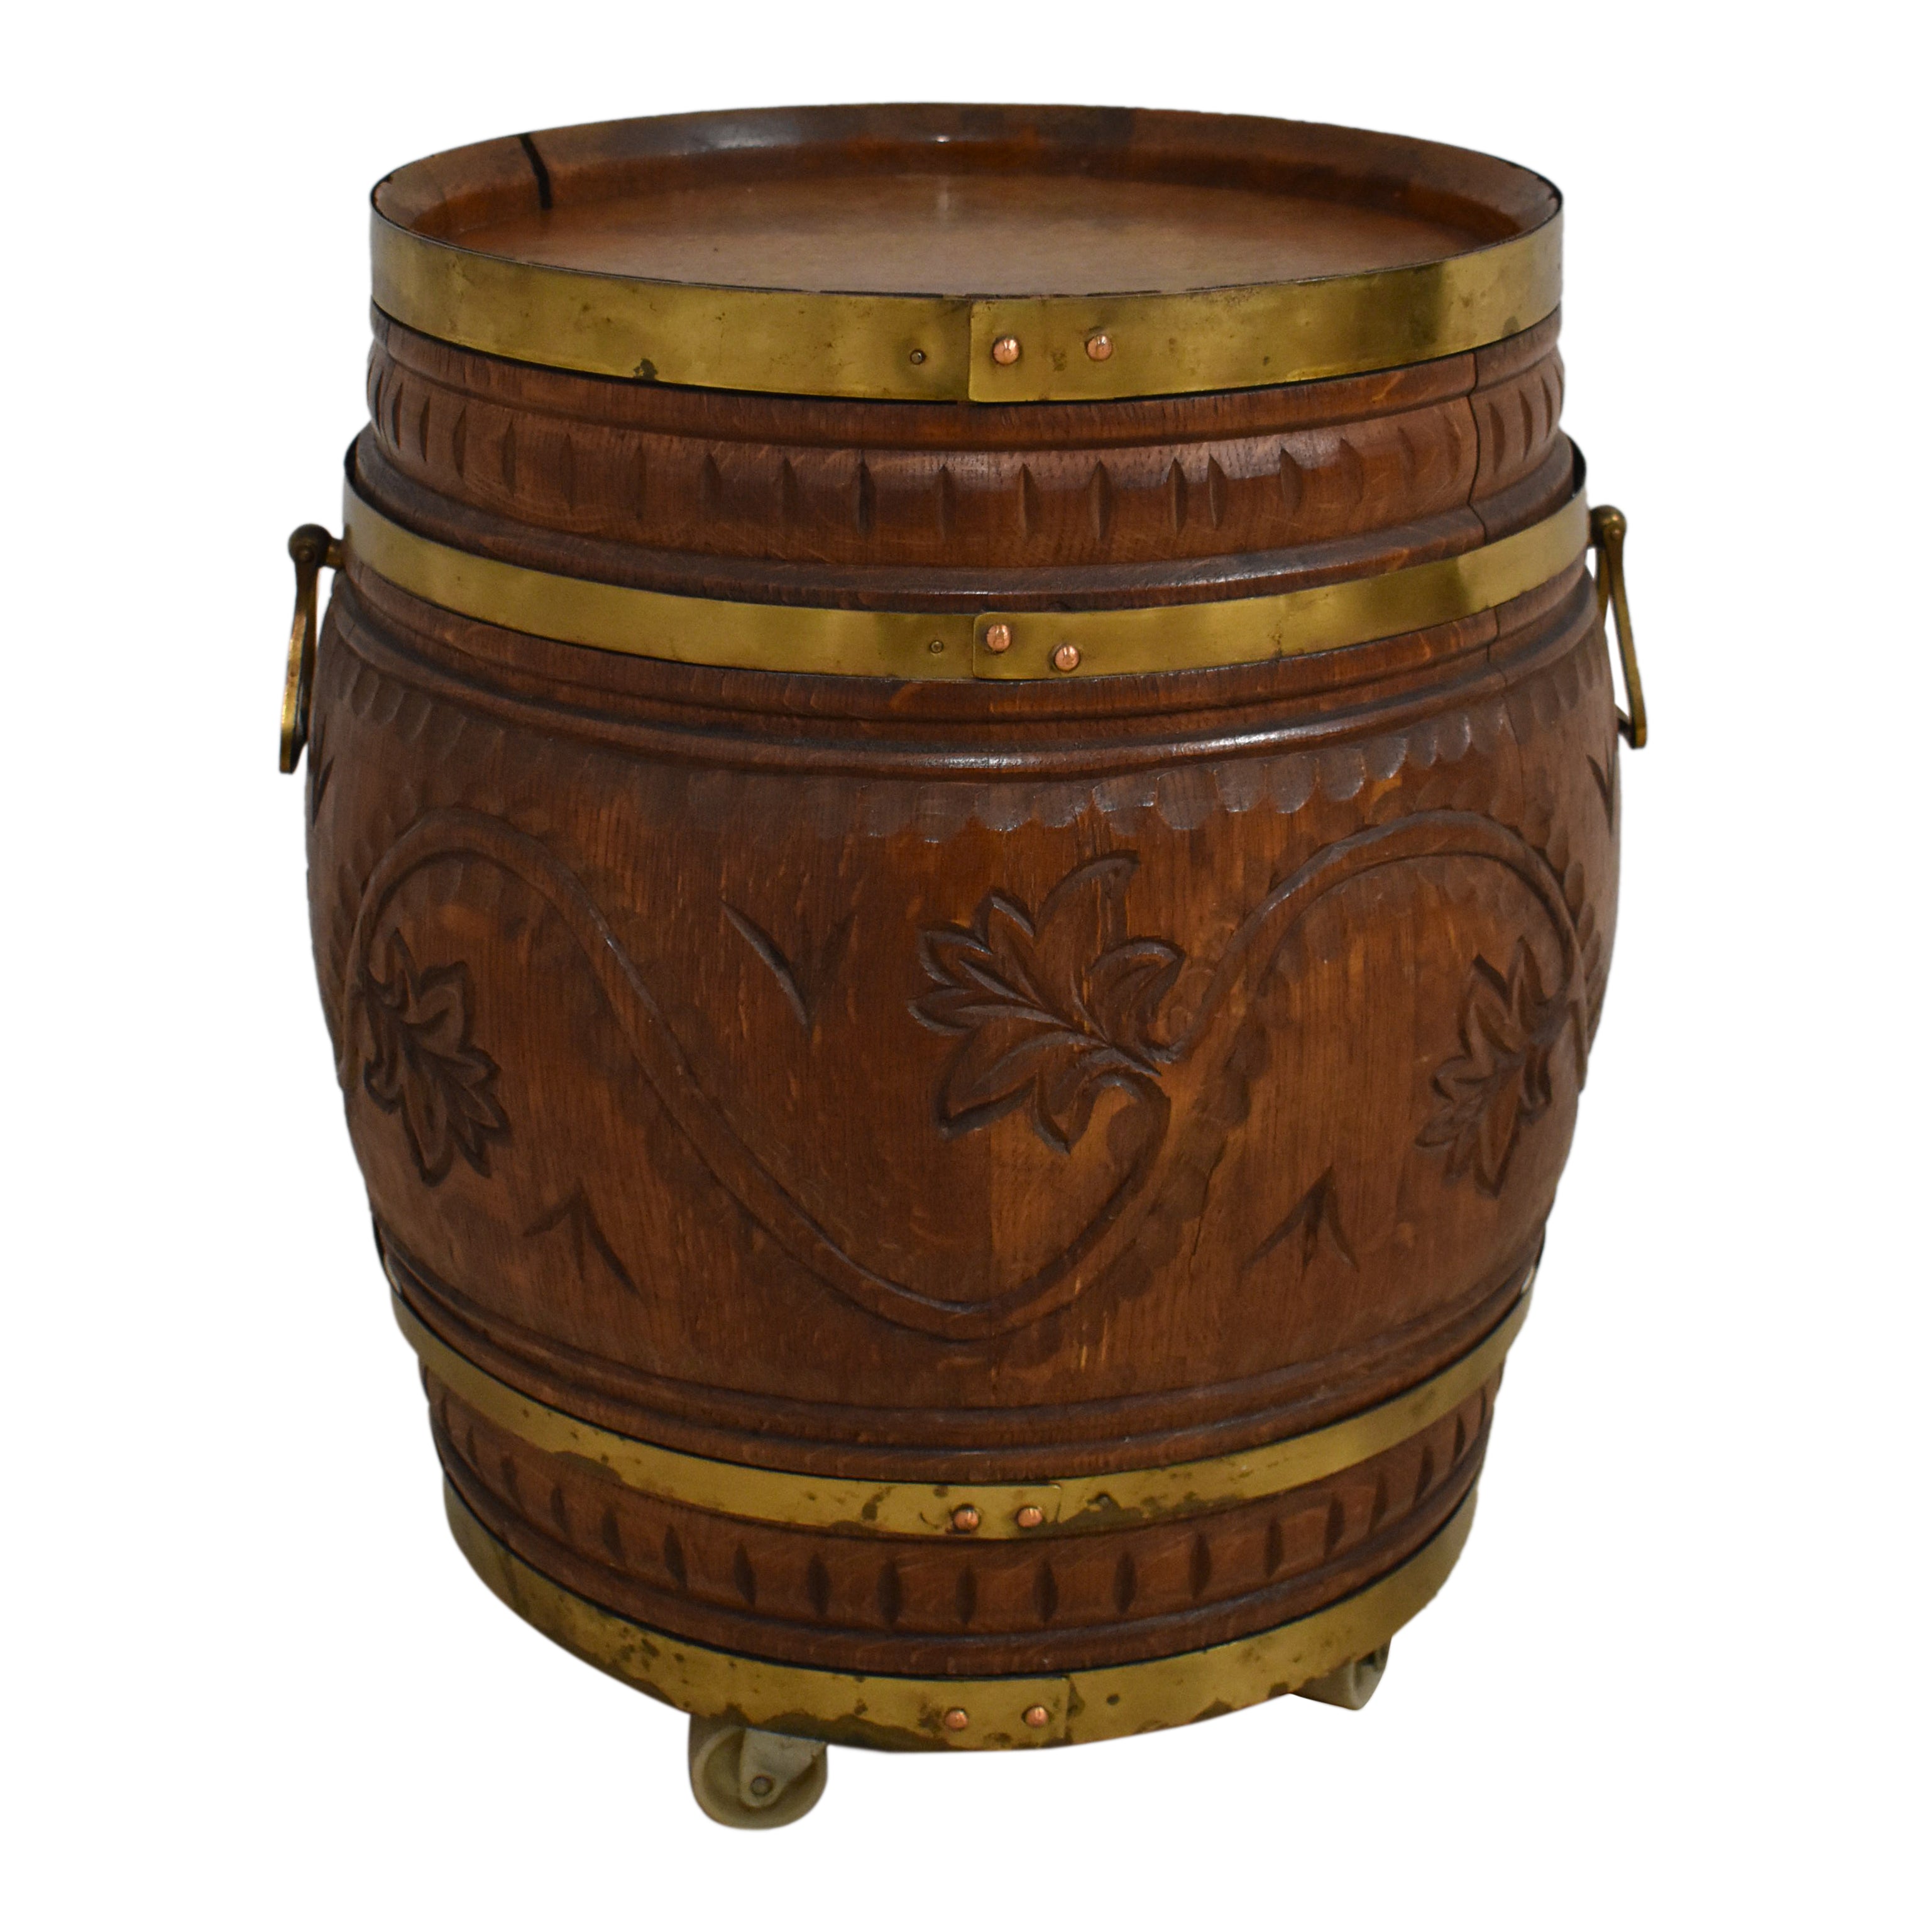 Carved Barrel with Liquor Cabinet